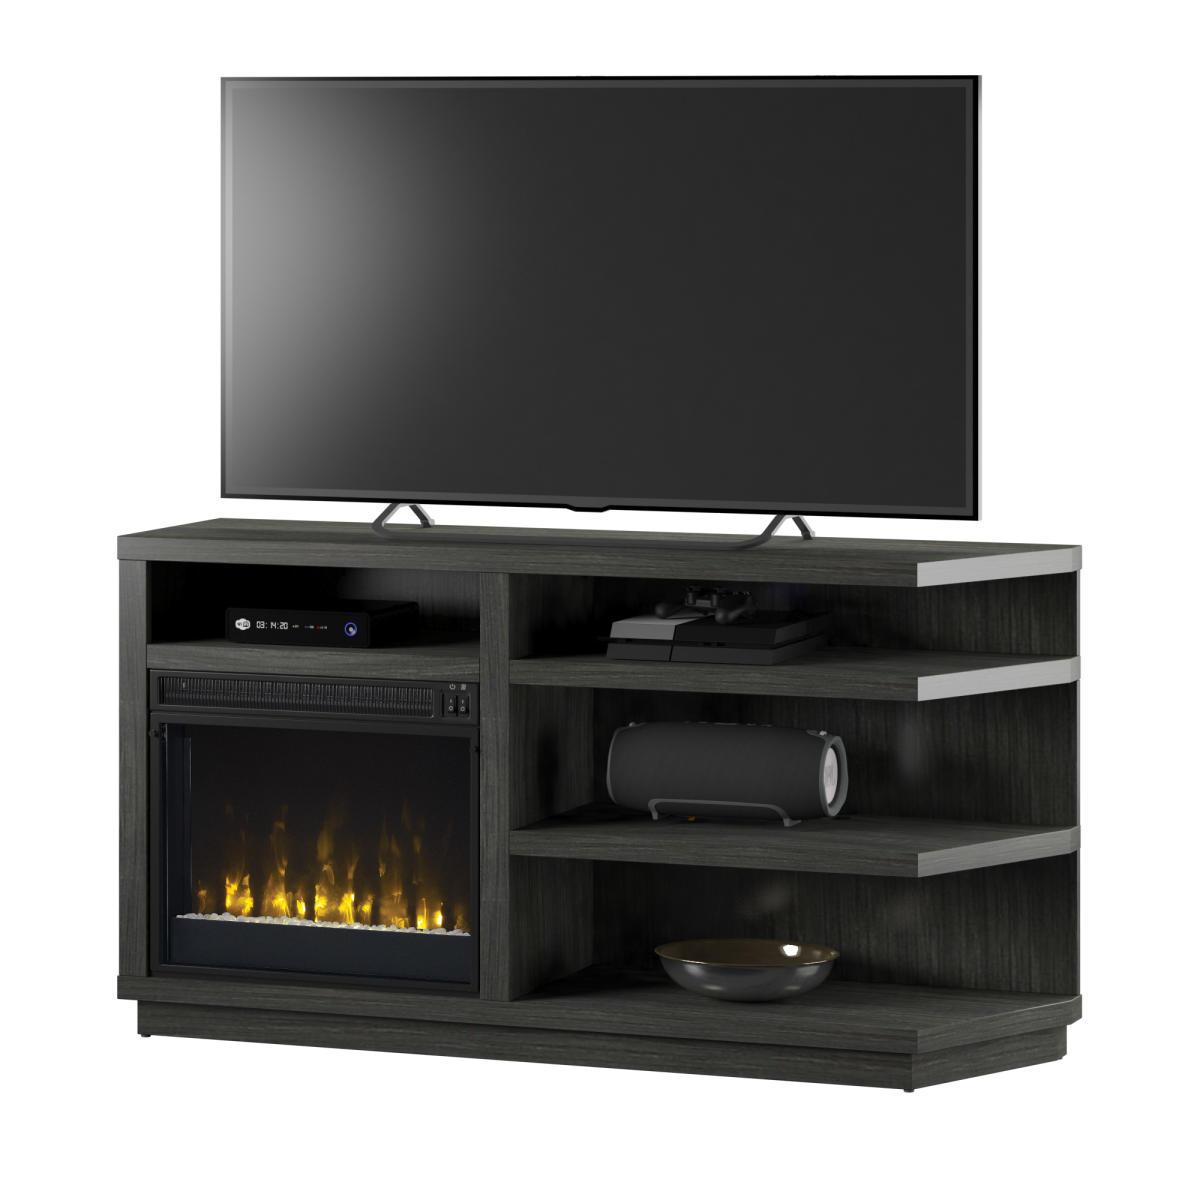 Gray TV Stand with fireplace insert